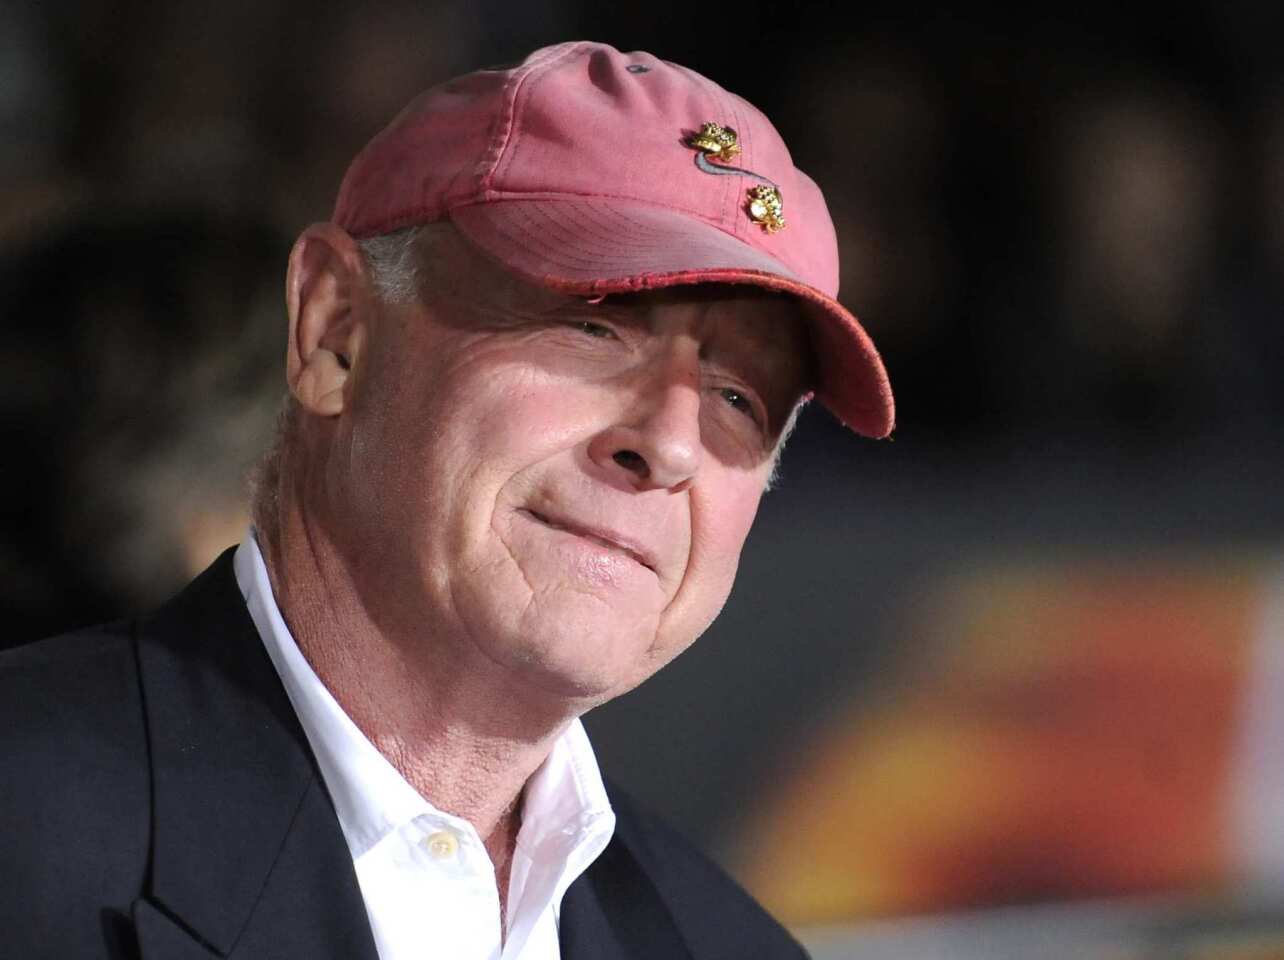 Director Tony Scott arrives at the premiere of "Unstoppable" in Los Angeles in 2010.